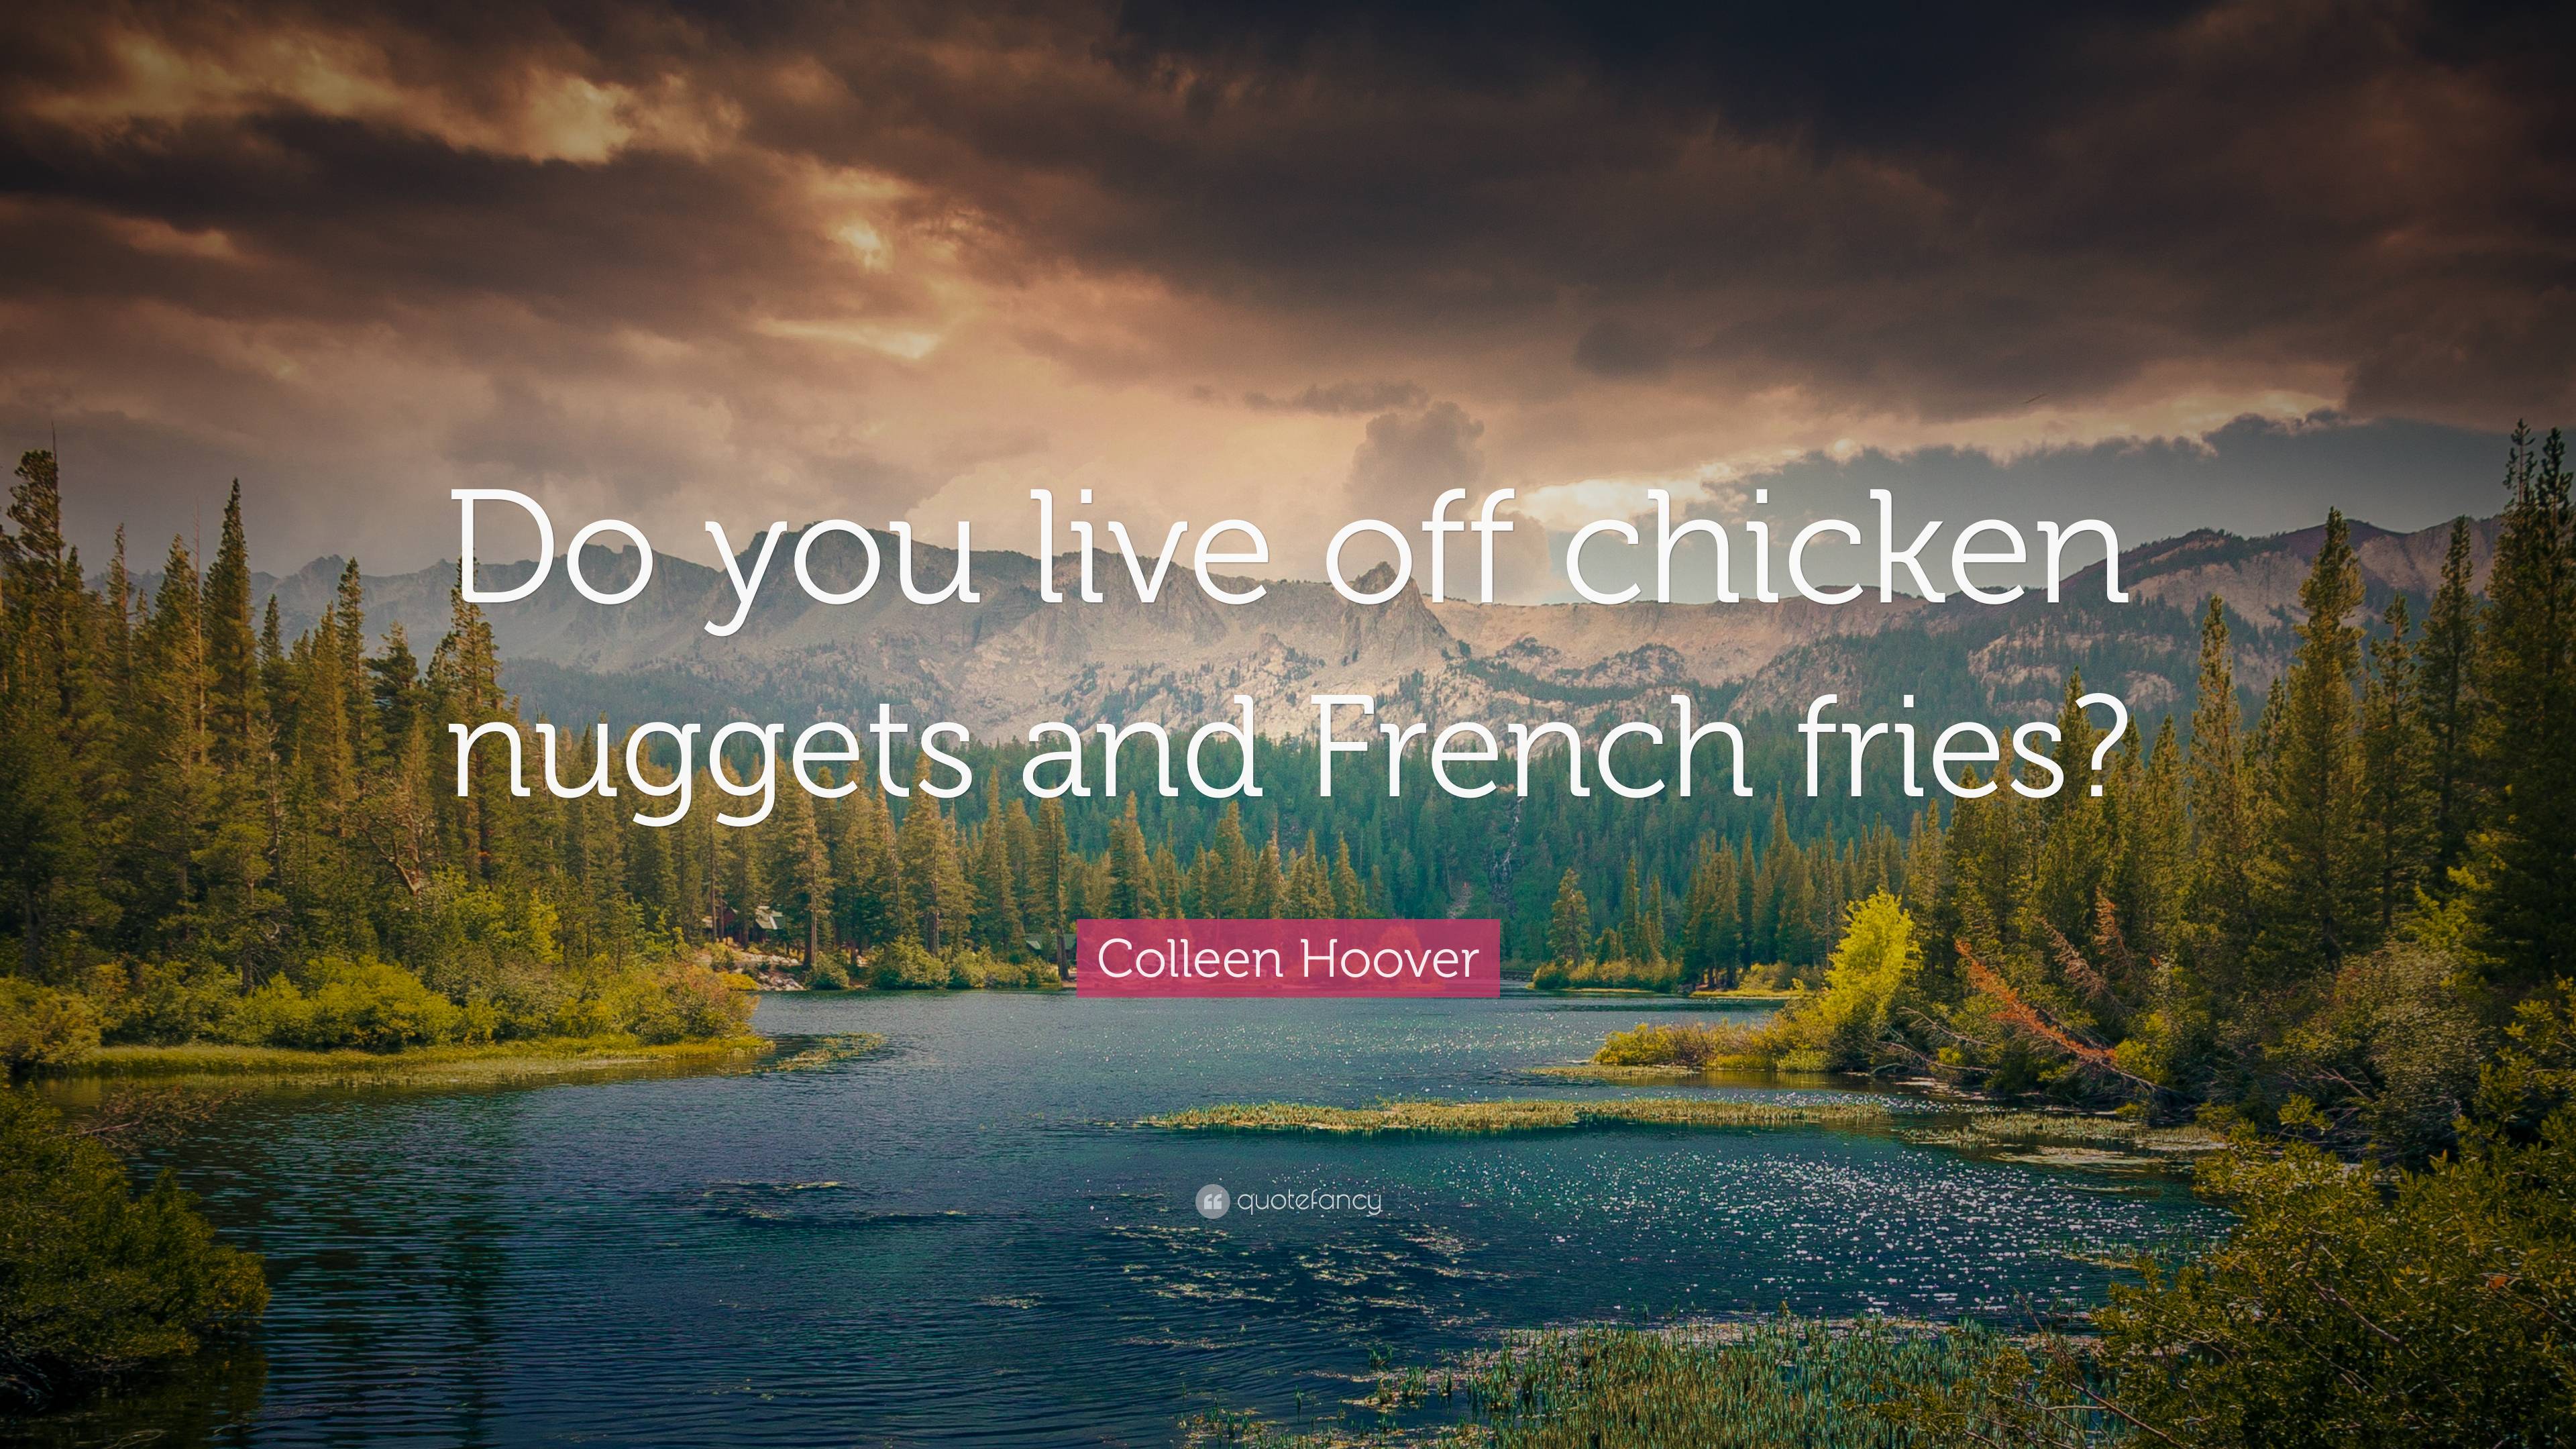 Colleen Hoover Quote: “Do you live off chicken nuggets and French fries?”